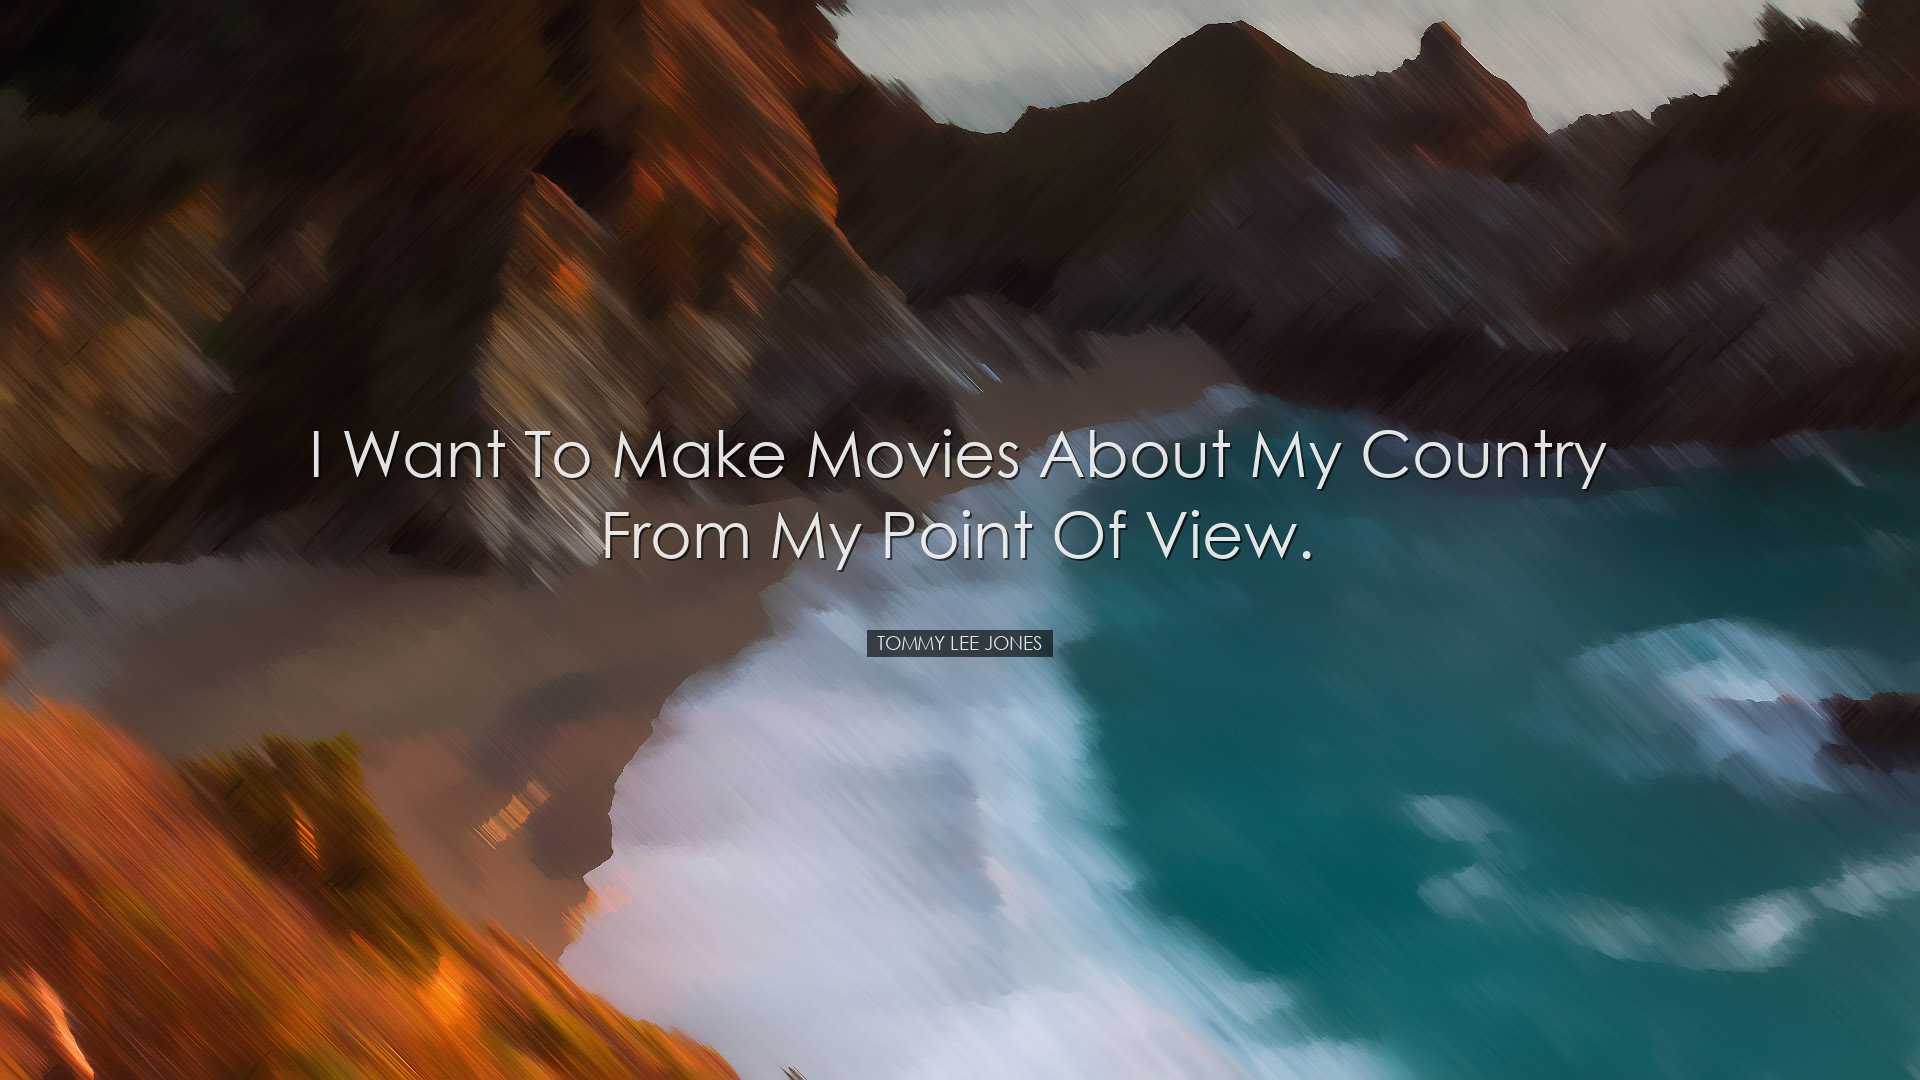 I want to make movies about my country from my point of view. - To